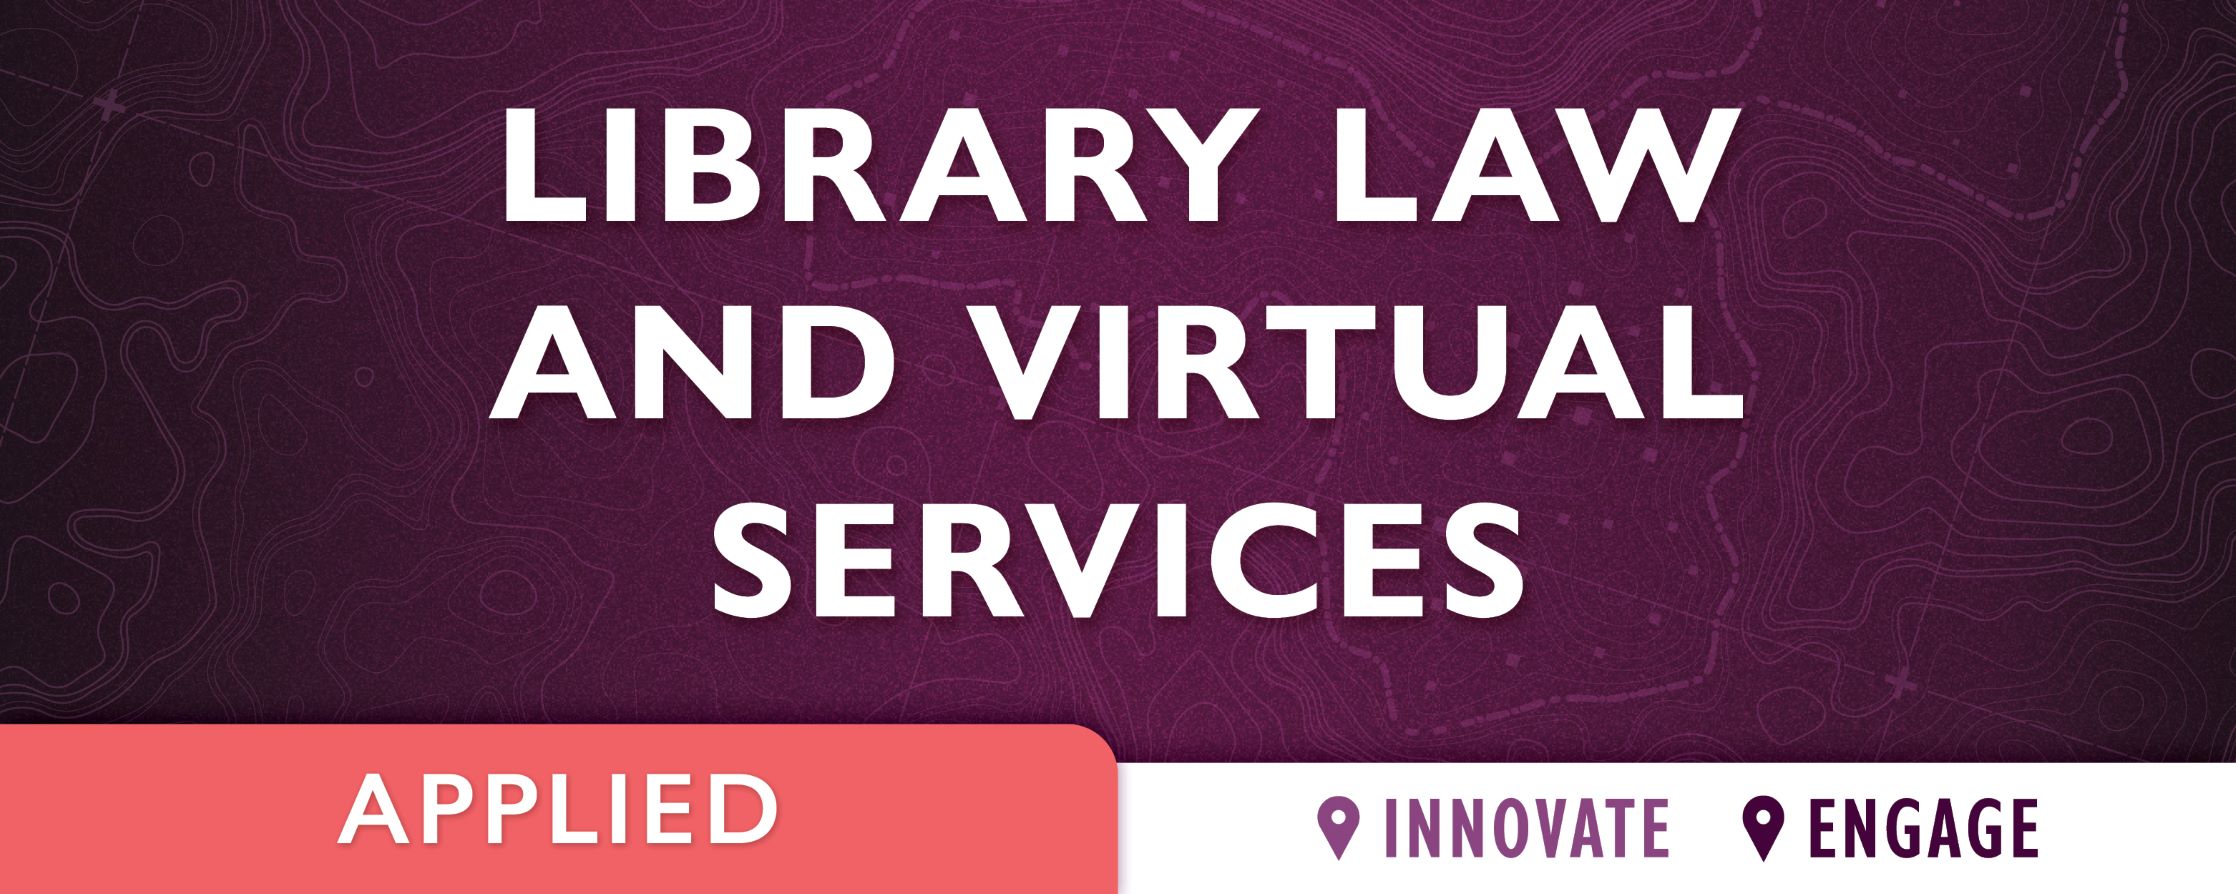 purple background with text: Library Law and Virtual Services 